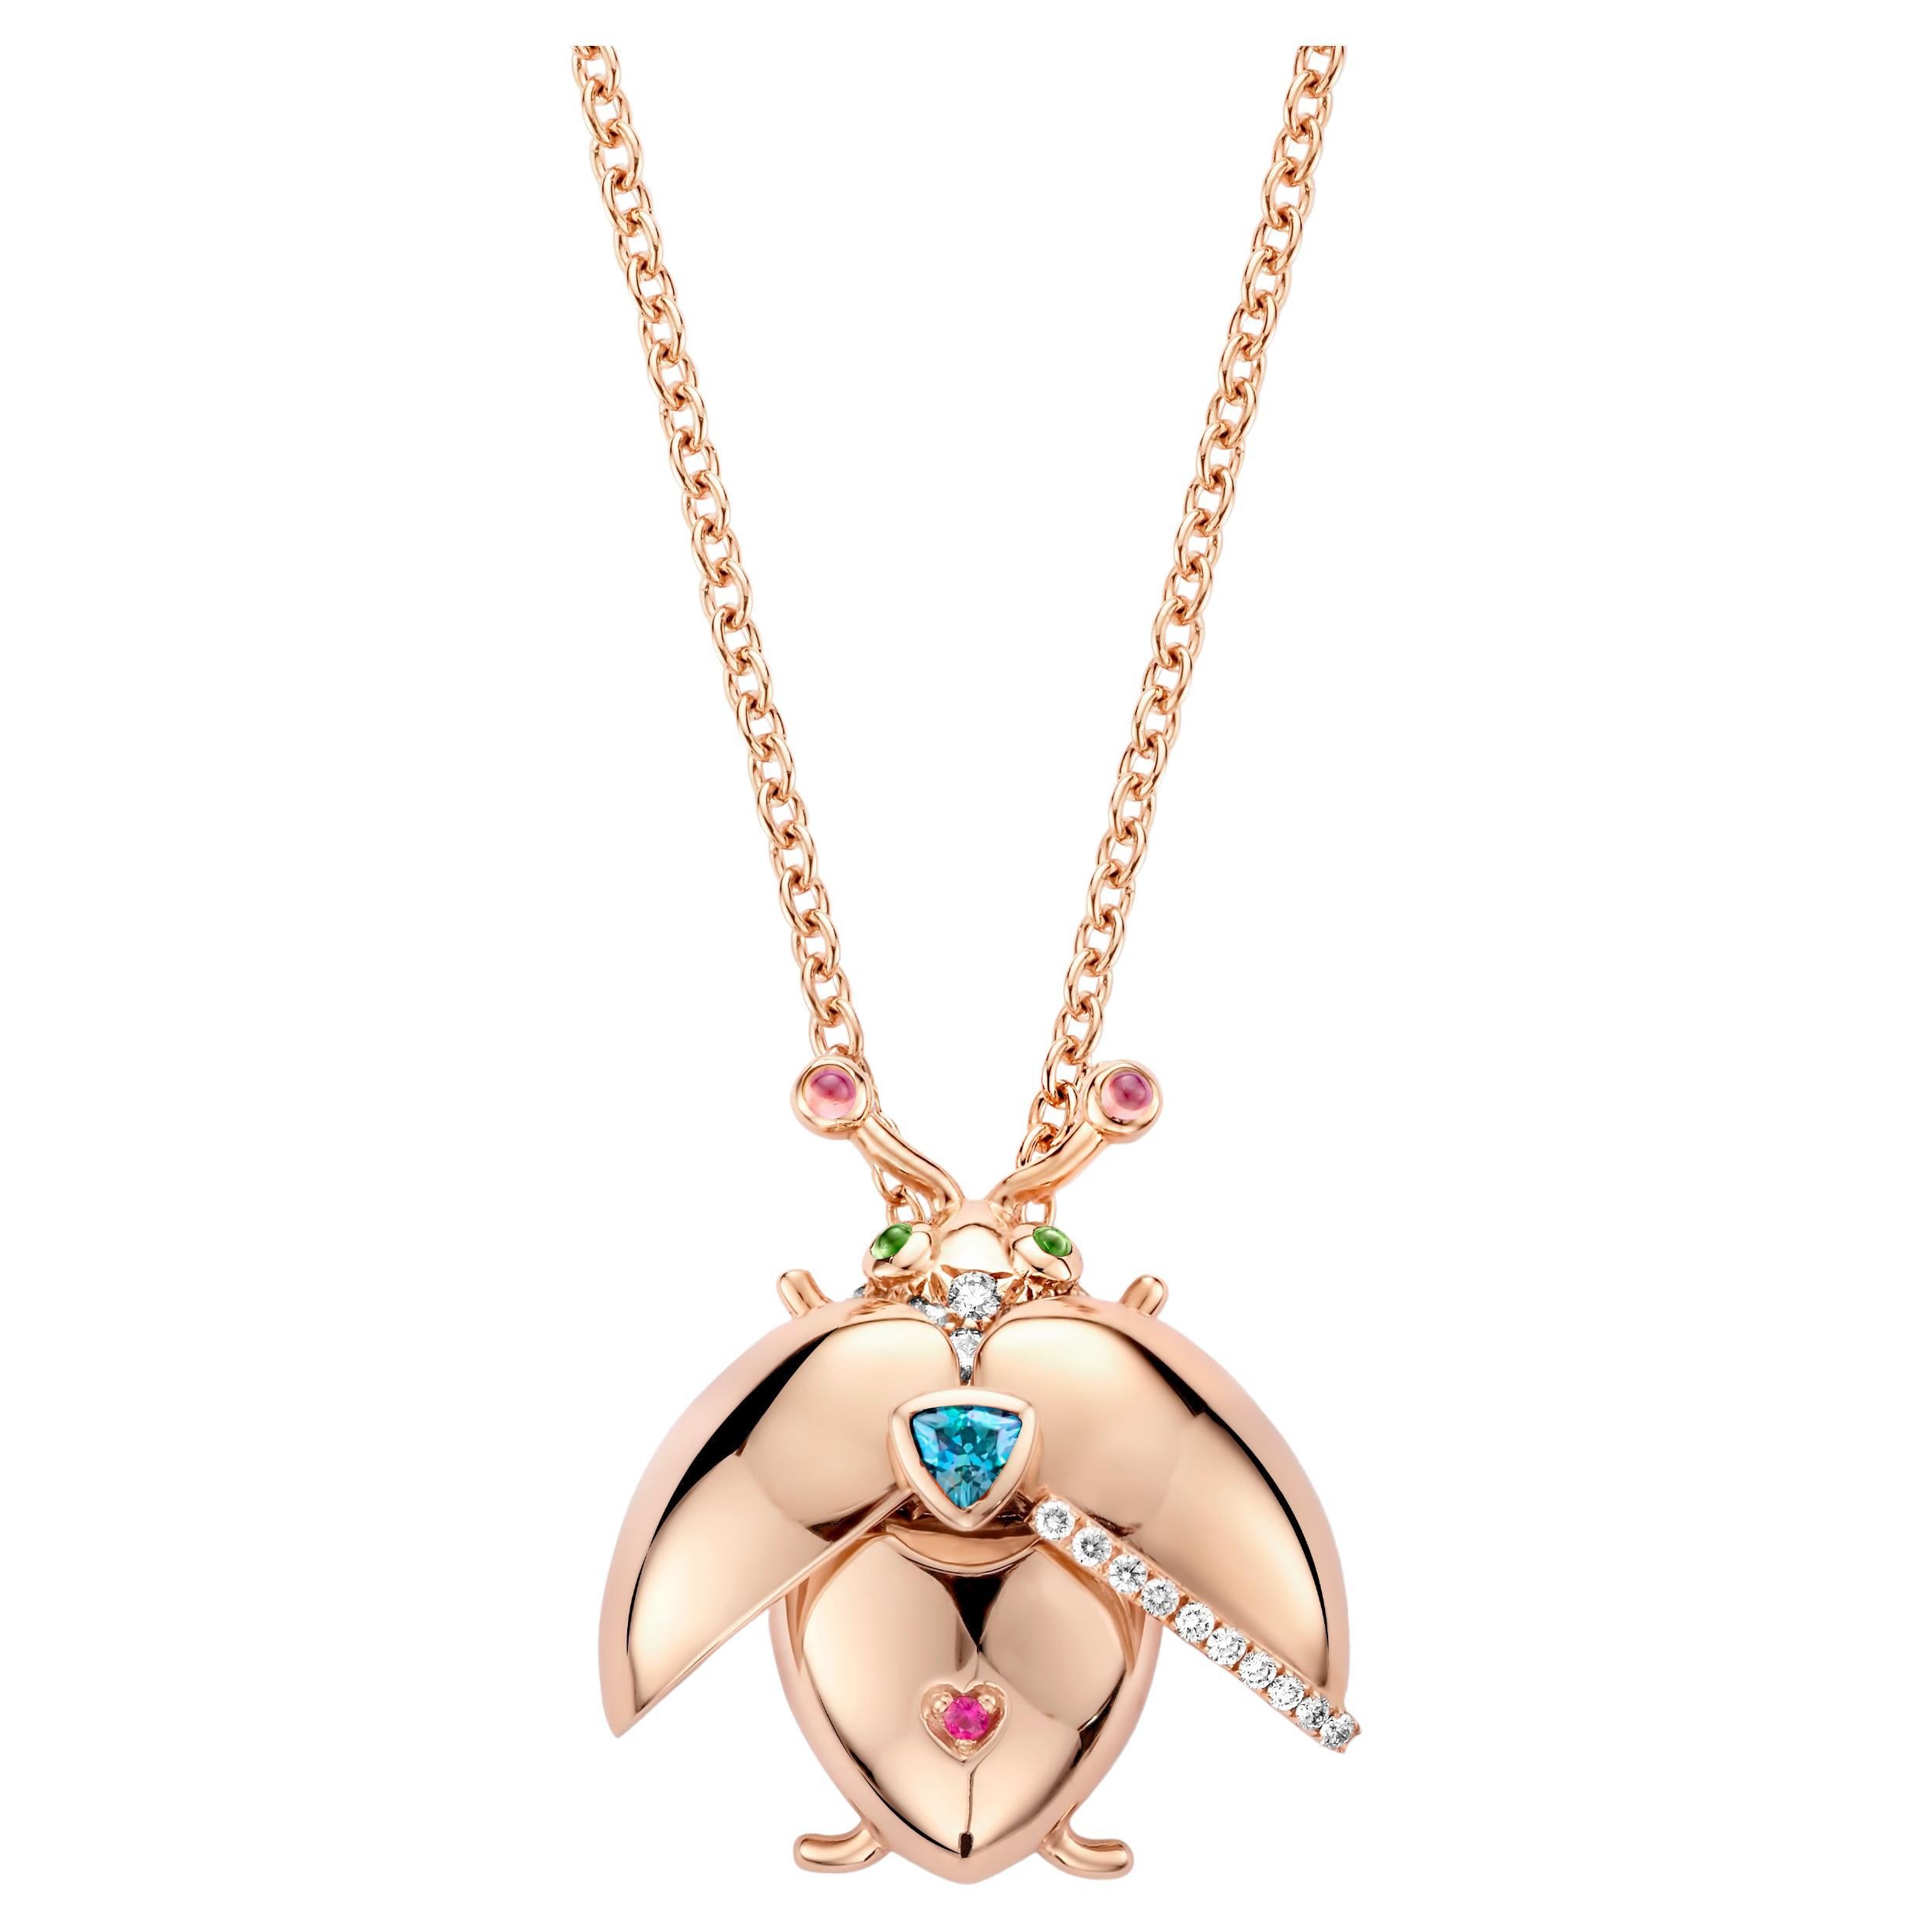 One of a kind lucky beetle necklace in 18K rose gold 11g set with the finest diamonds in brilliant cut 0,37Ct (VVS/DEF quality) one natural, indigolite tourmaline in triangel cut and a pink sapphire in brilliant cut. The feelers and the eyes are set